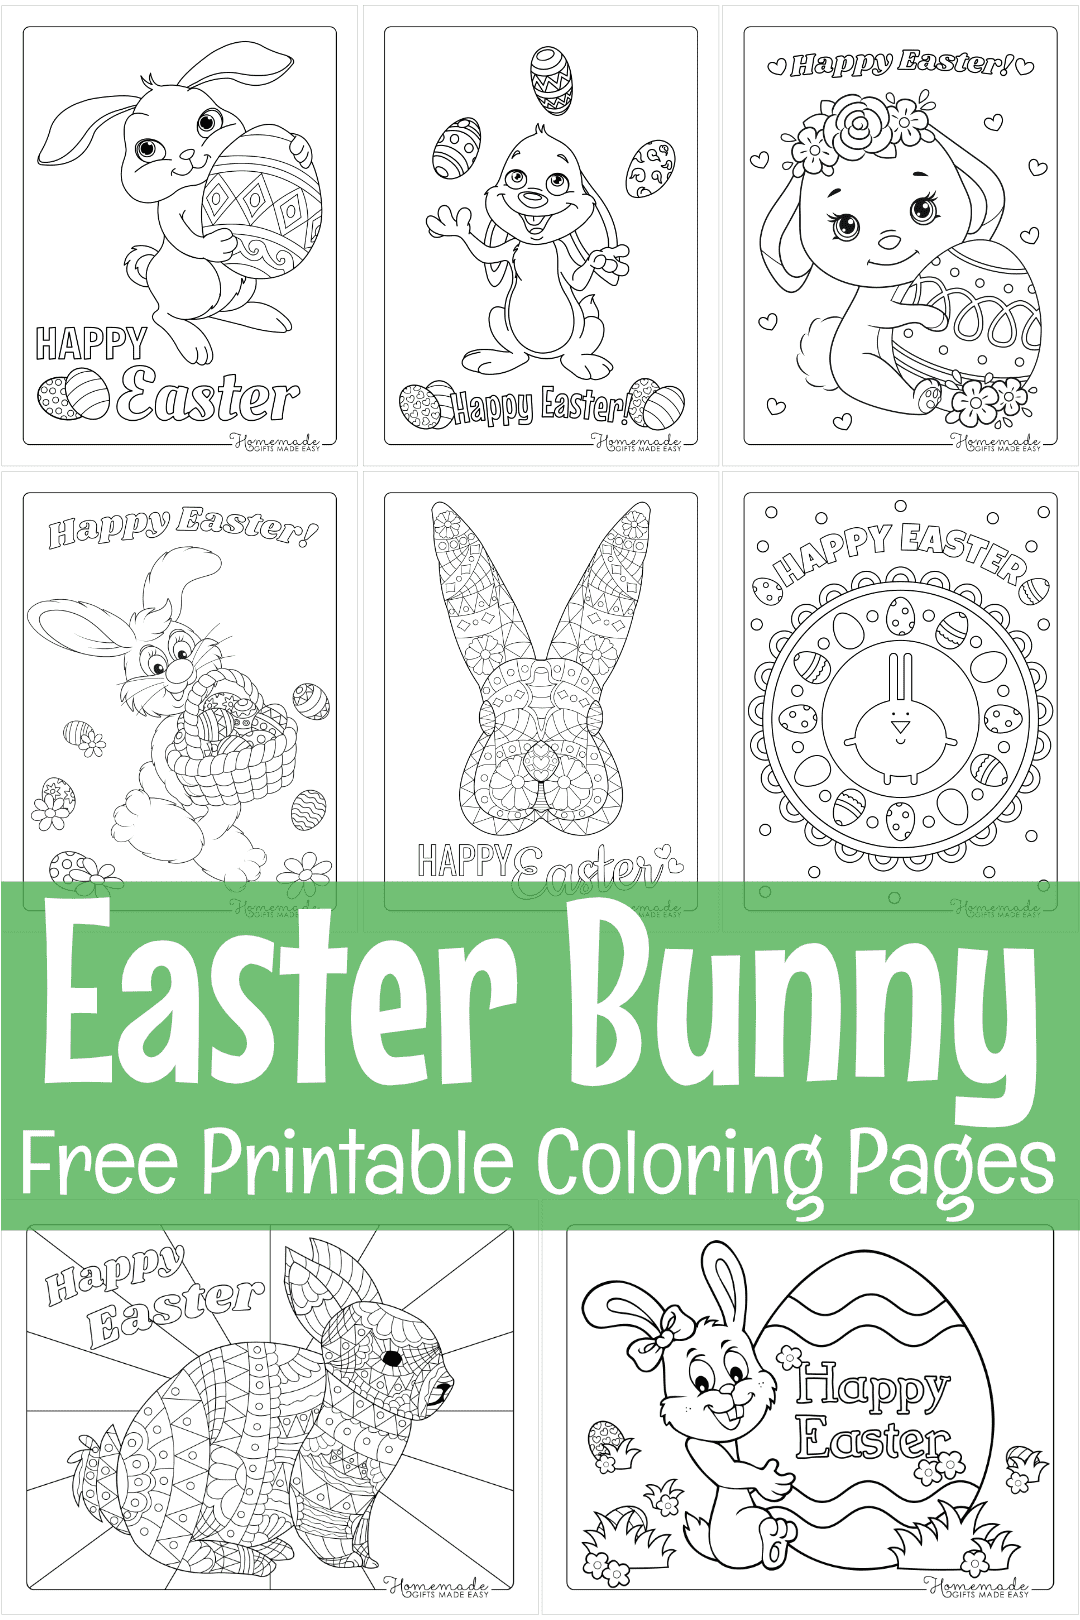 Free Printable Easter Bunny Coloring Pages for Kids & Adults 20